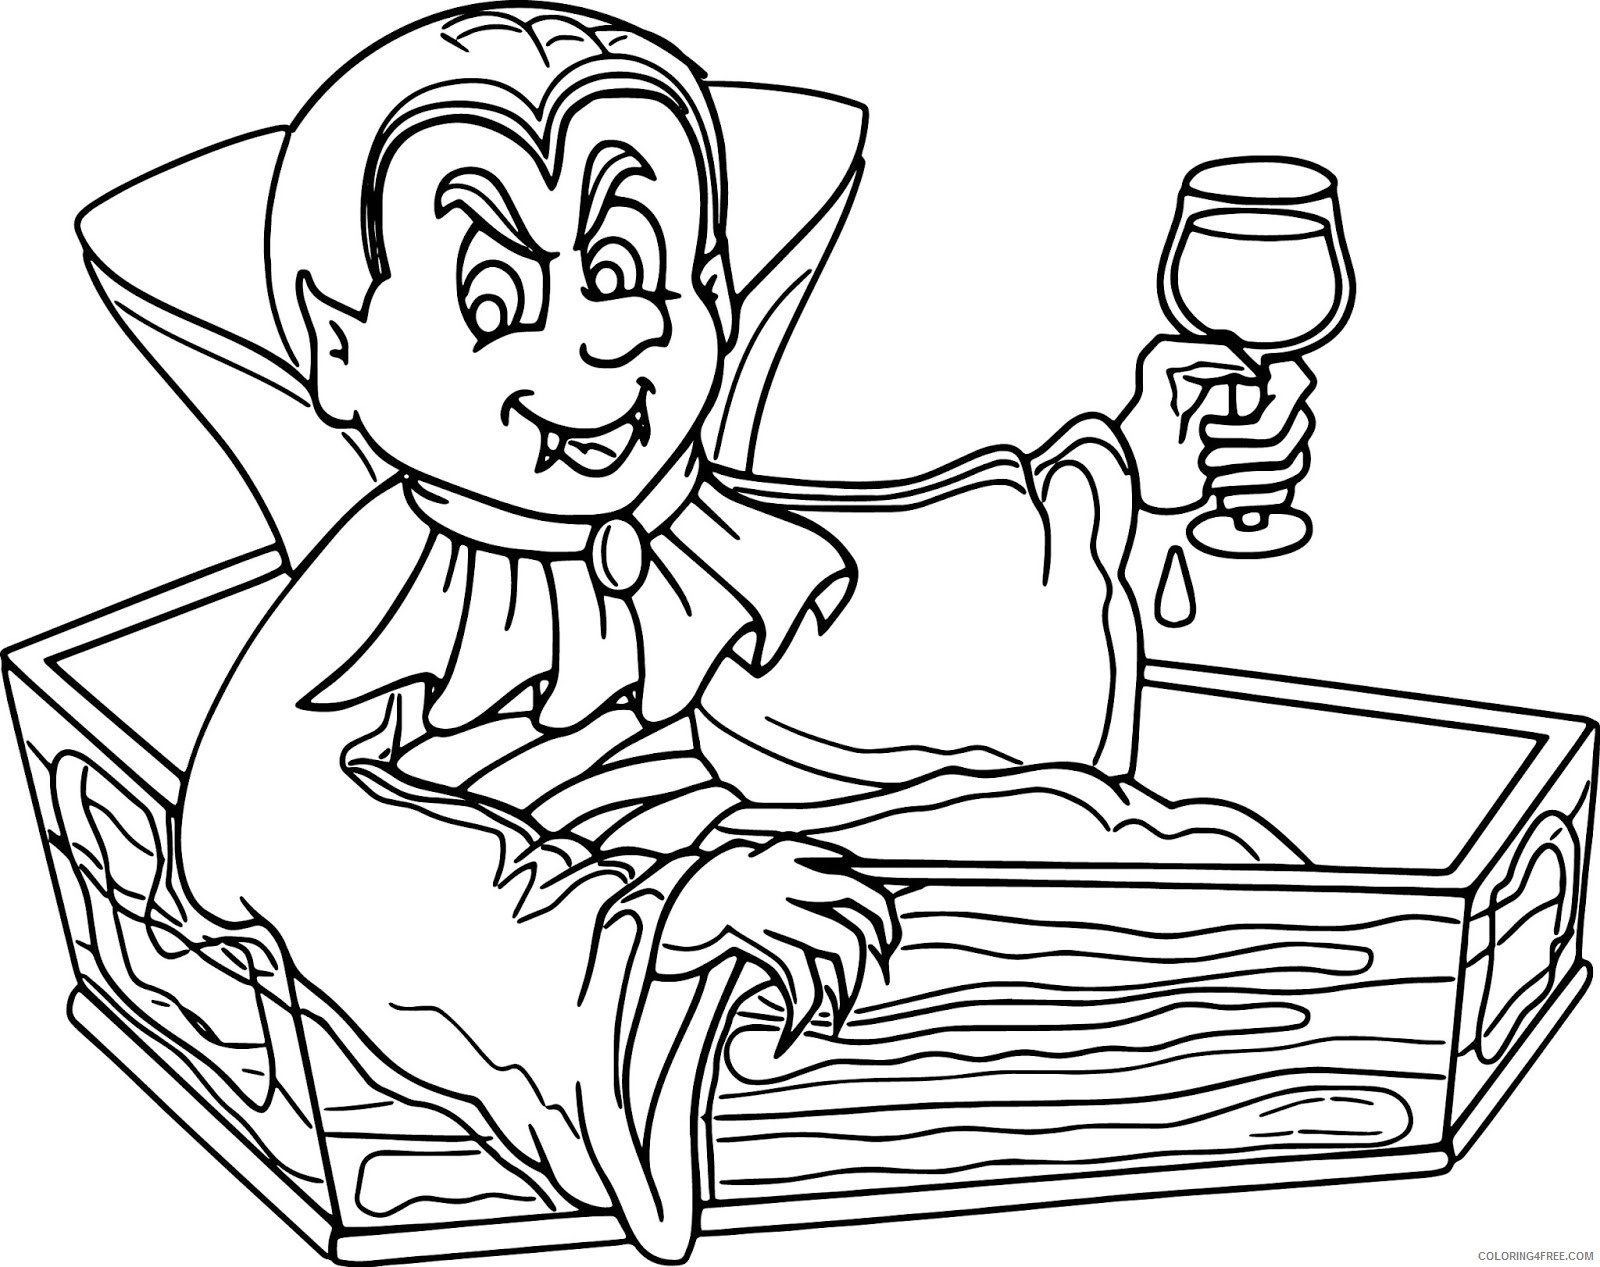 Vampire in a Coffin Coloring Page   Free Printable Coloring Pages ...